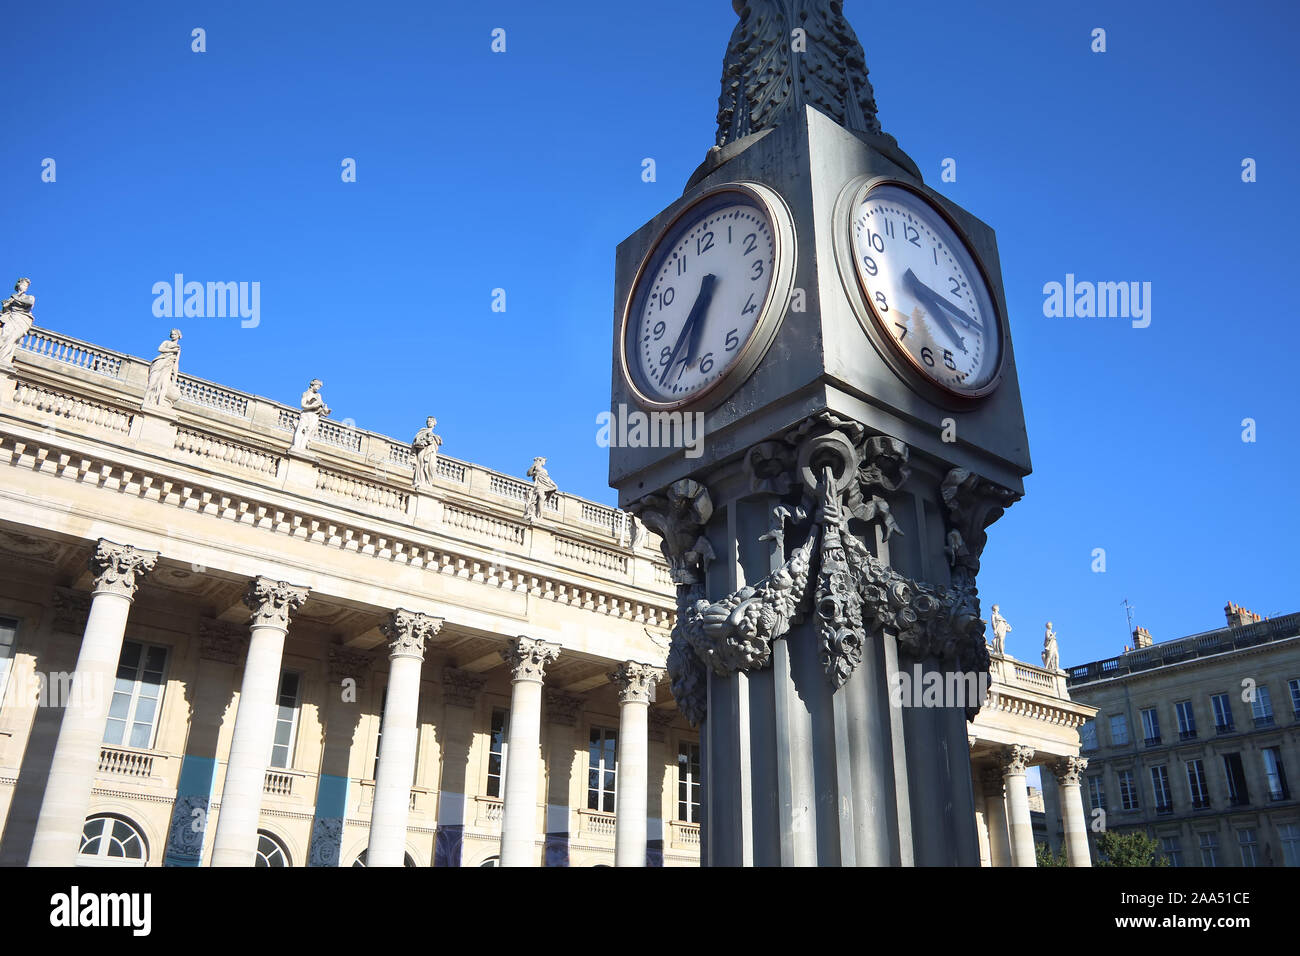 Close up of the clock in Place de la Comédie, with the beautiful Grand Theatre in the background in the center of the city, Bordeaux, France. Stock Photo